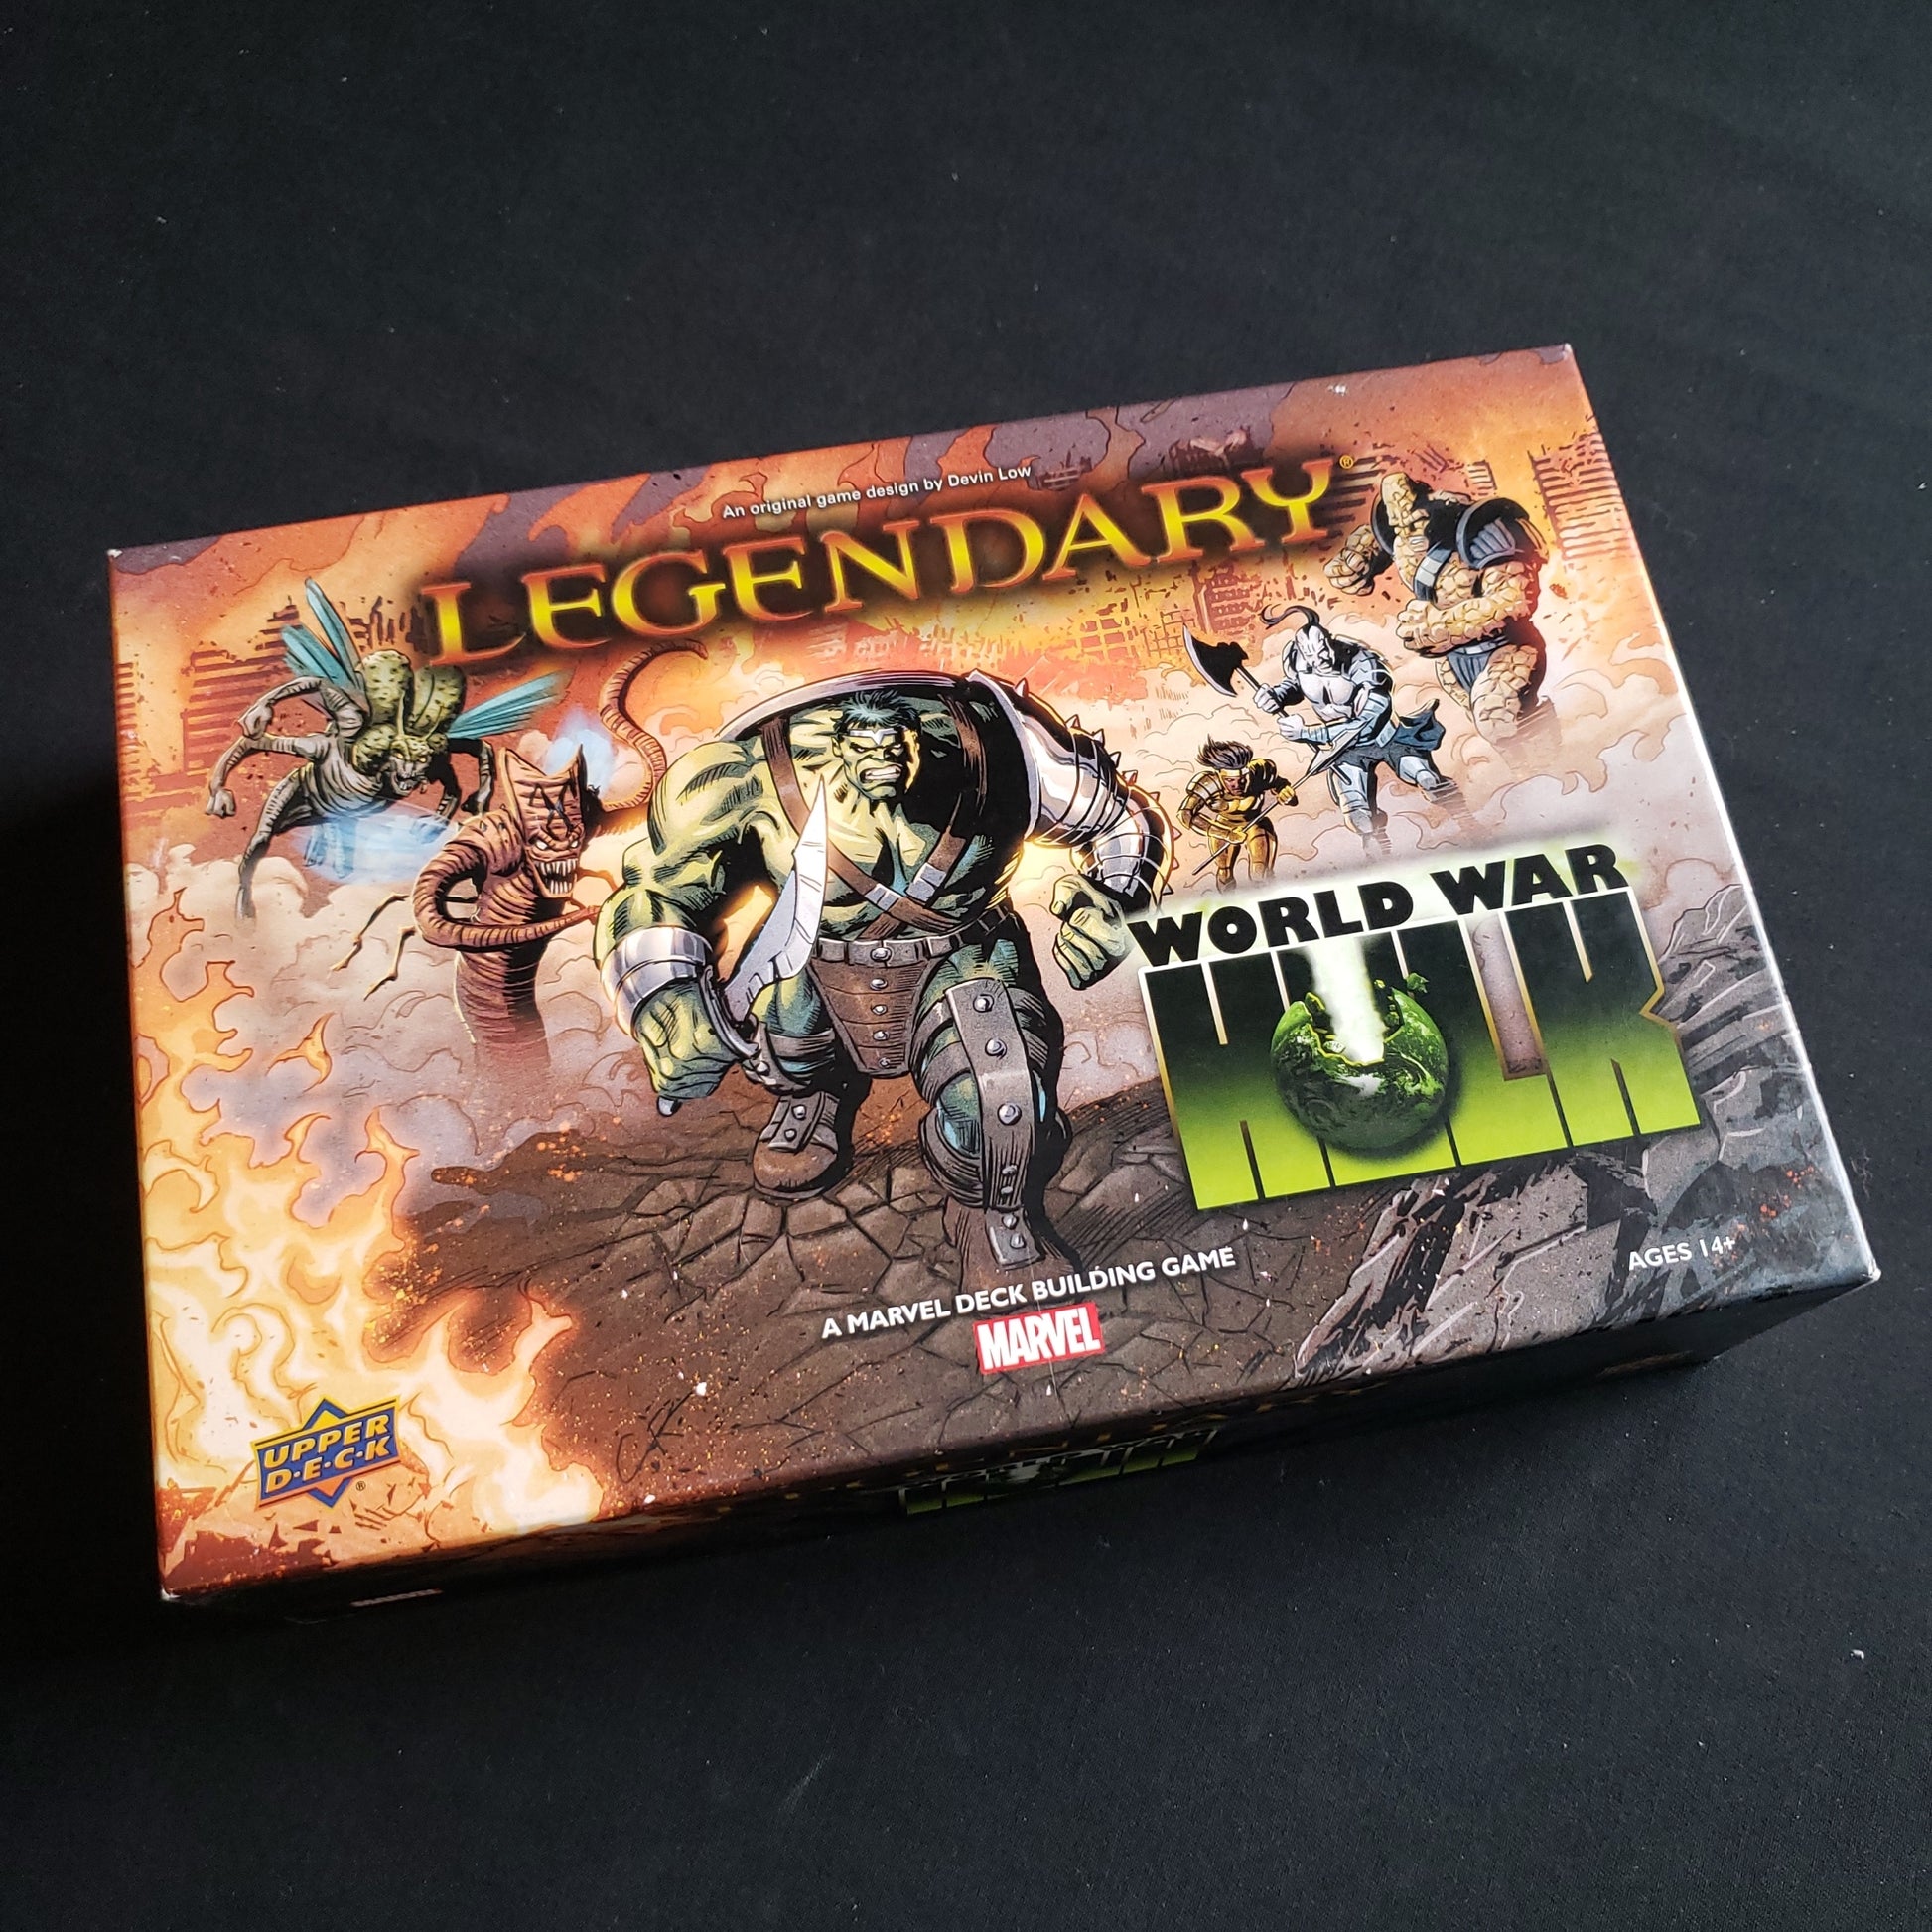 Image shows the front of the box for the World War Hulk Expansion for the Legendary Marvel card game